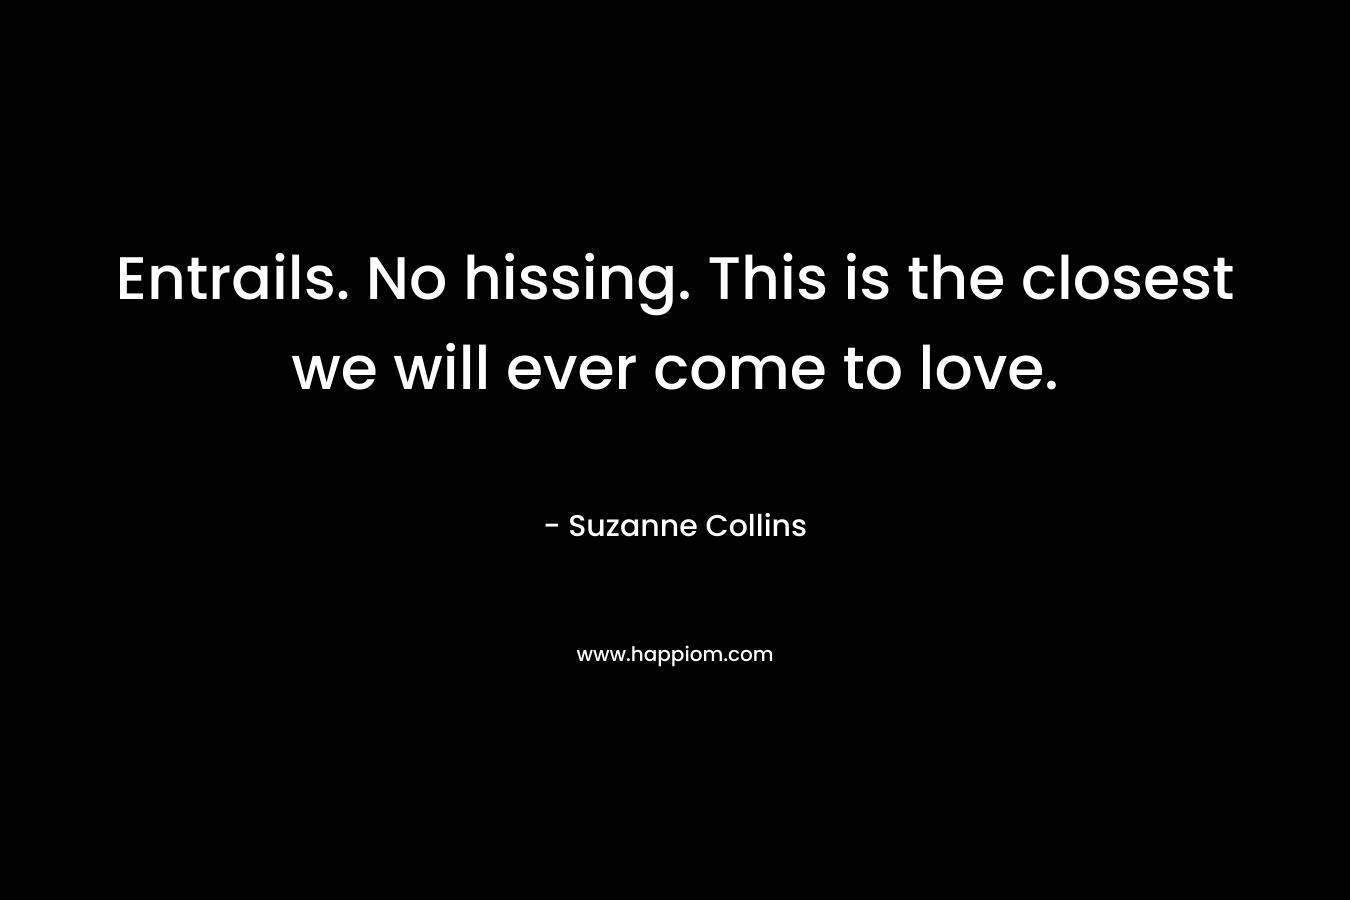 Entrails. No hissing. This is the closest we will ever come to love. – Suzanne Collins